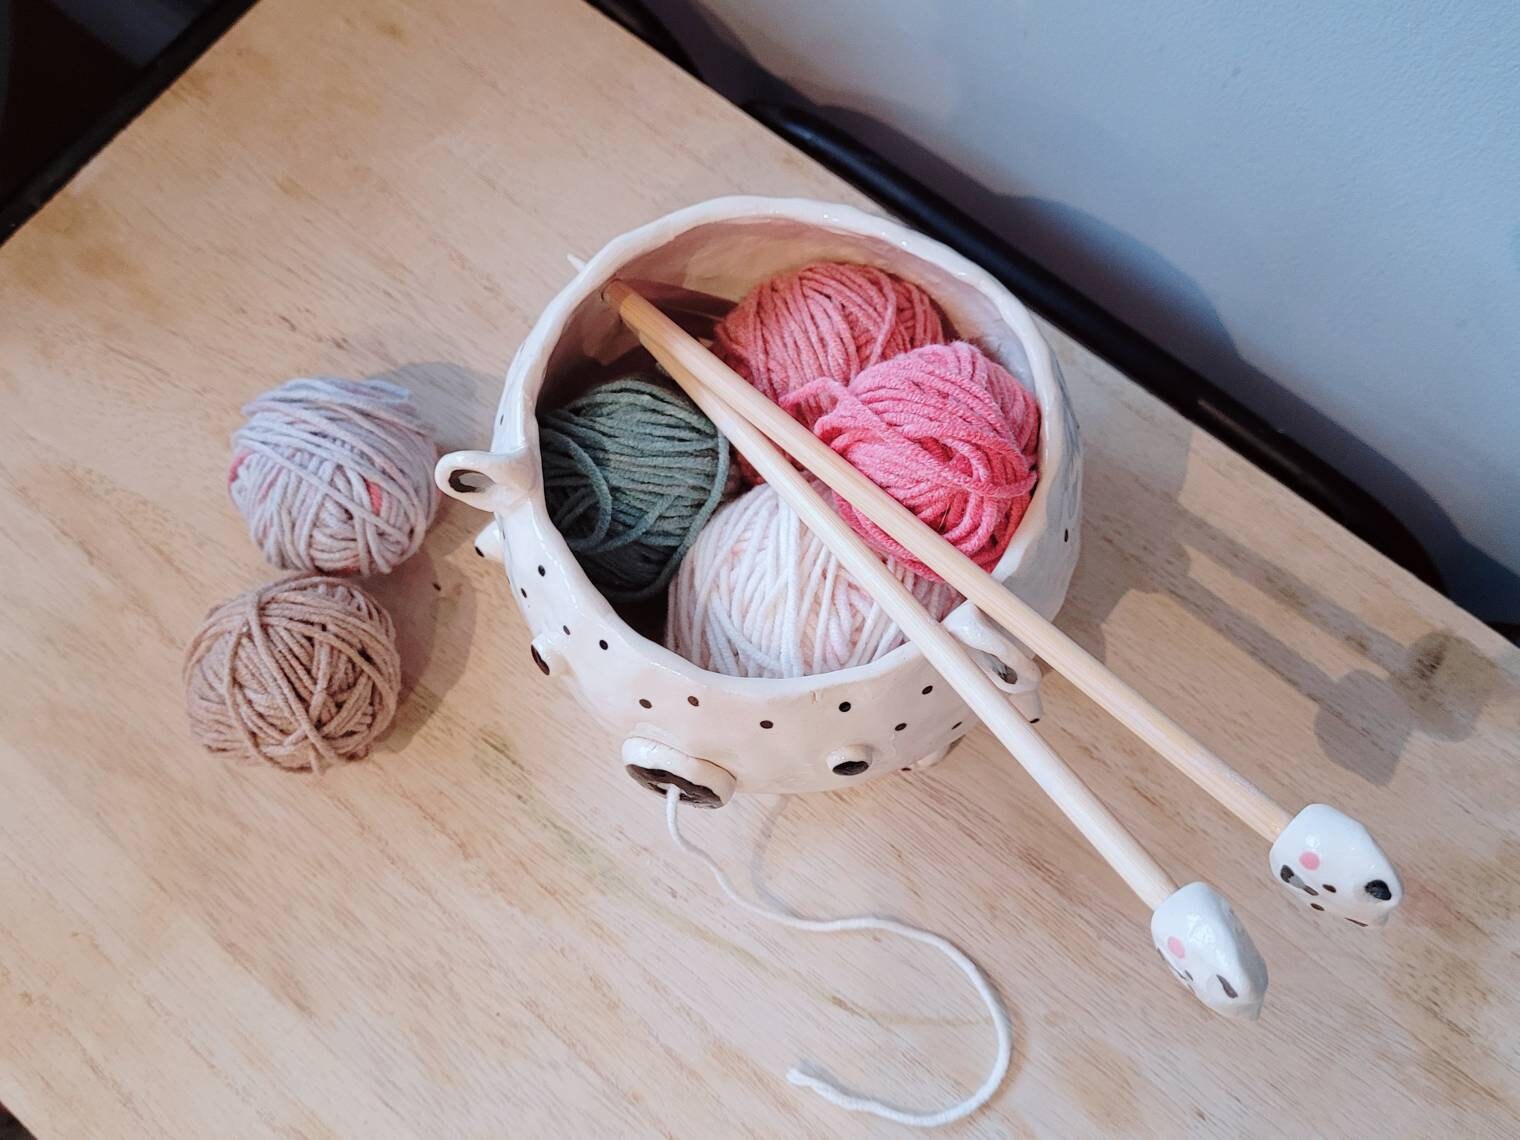 Gifts for DAD - 7 Ceramic Yarn Bowl Holder Bowls for Knitting Crochet for  Moms - Helia Beer Co